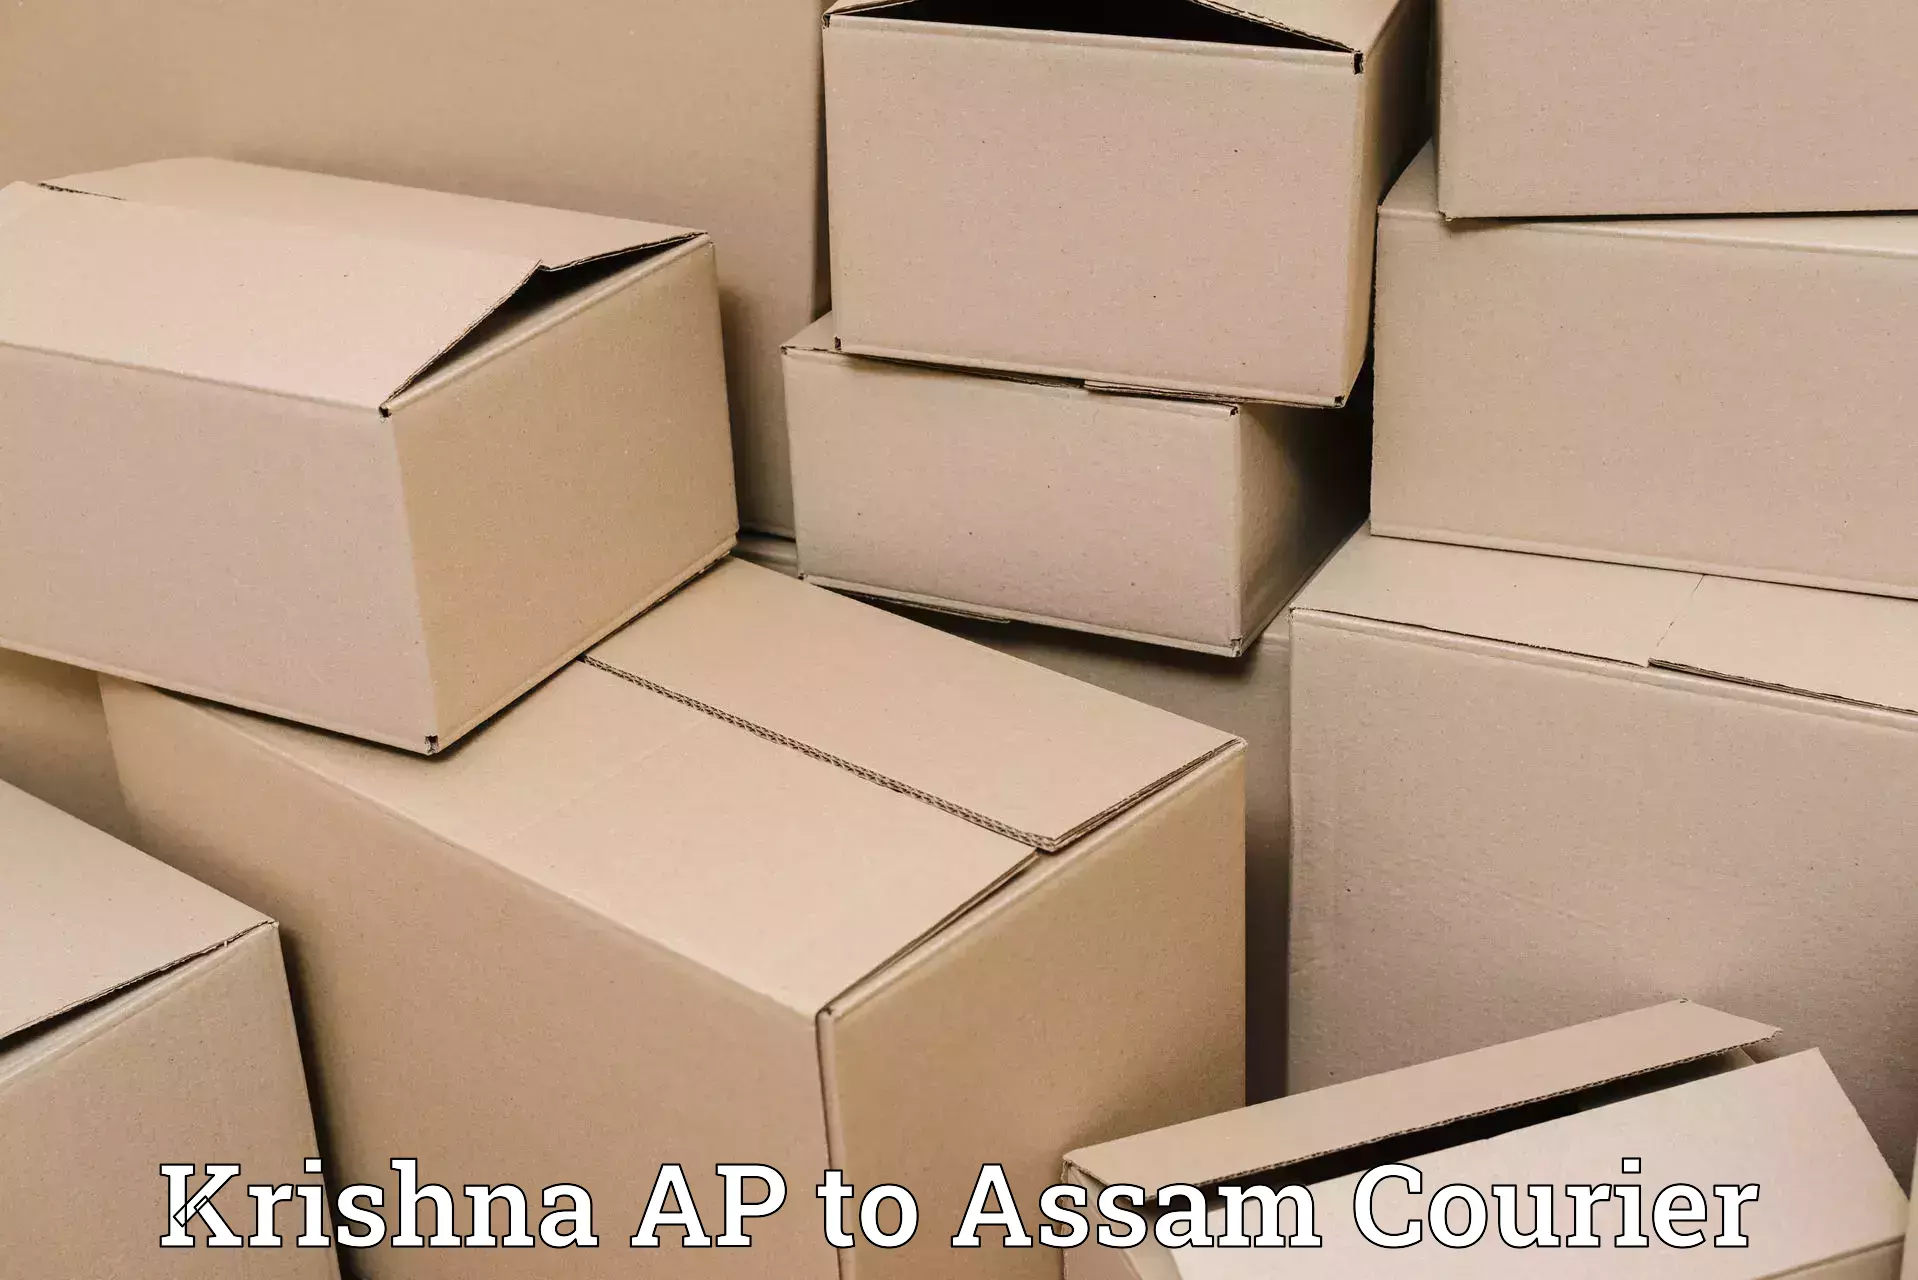 On-call courier service Krishna AP to Hojai